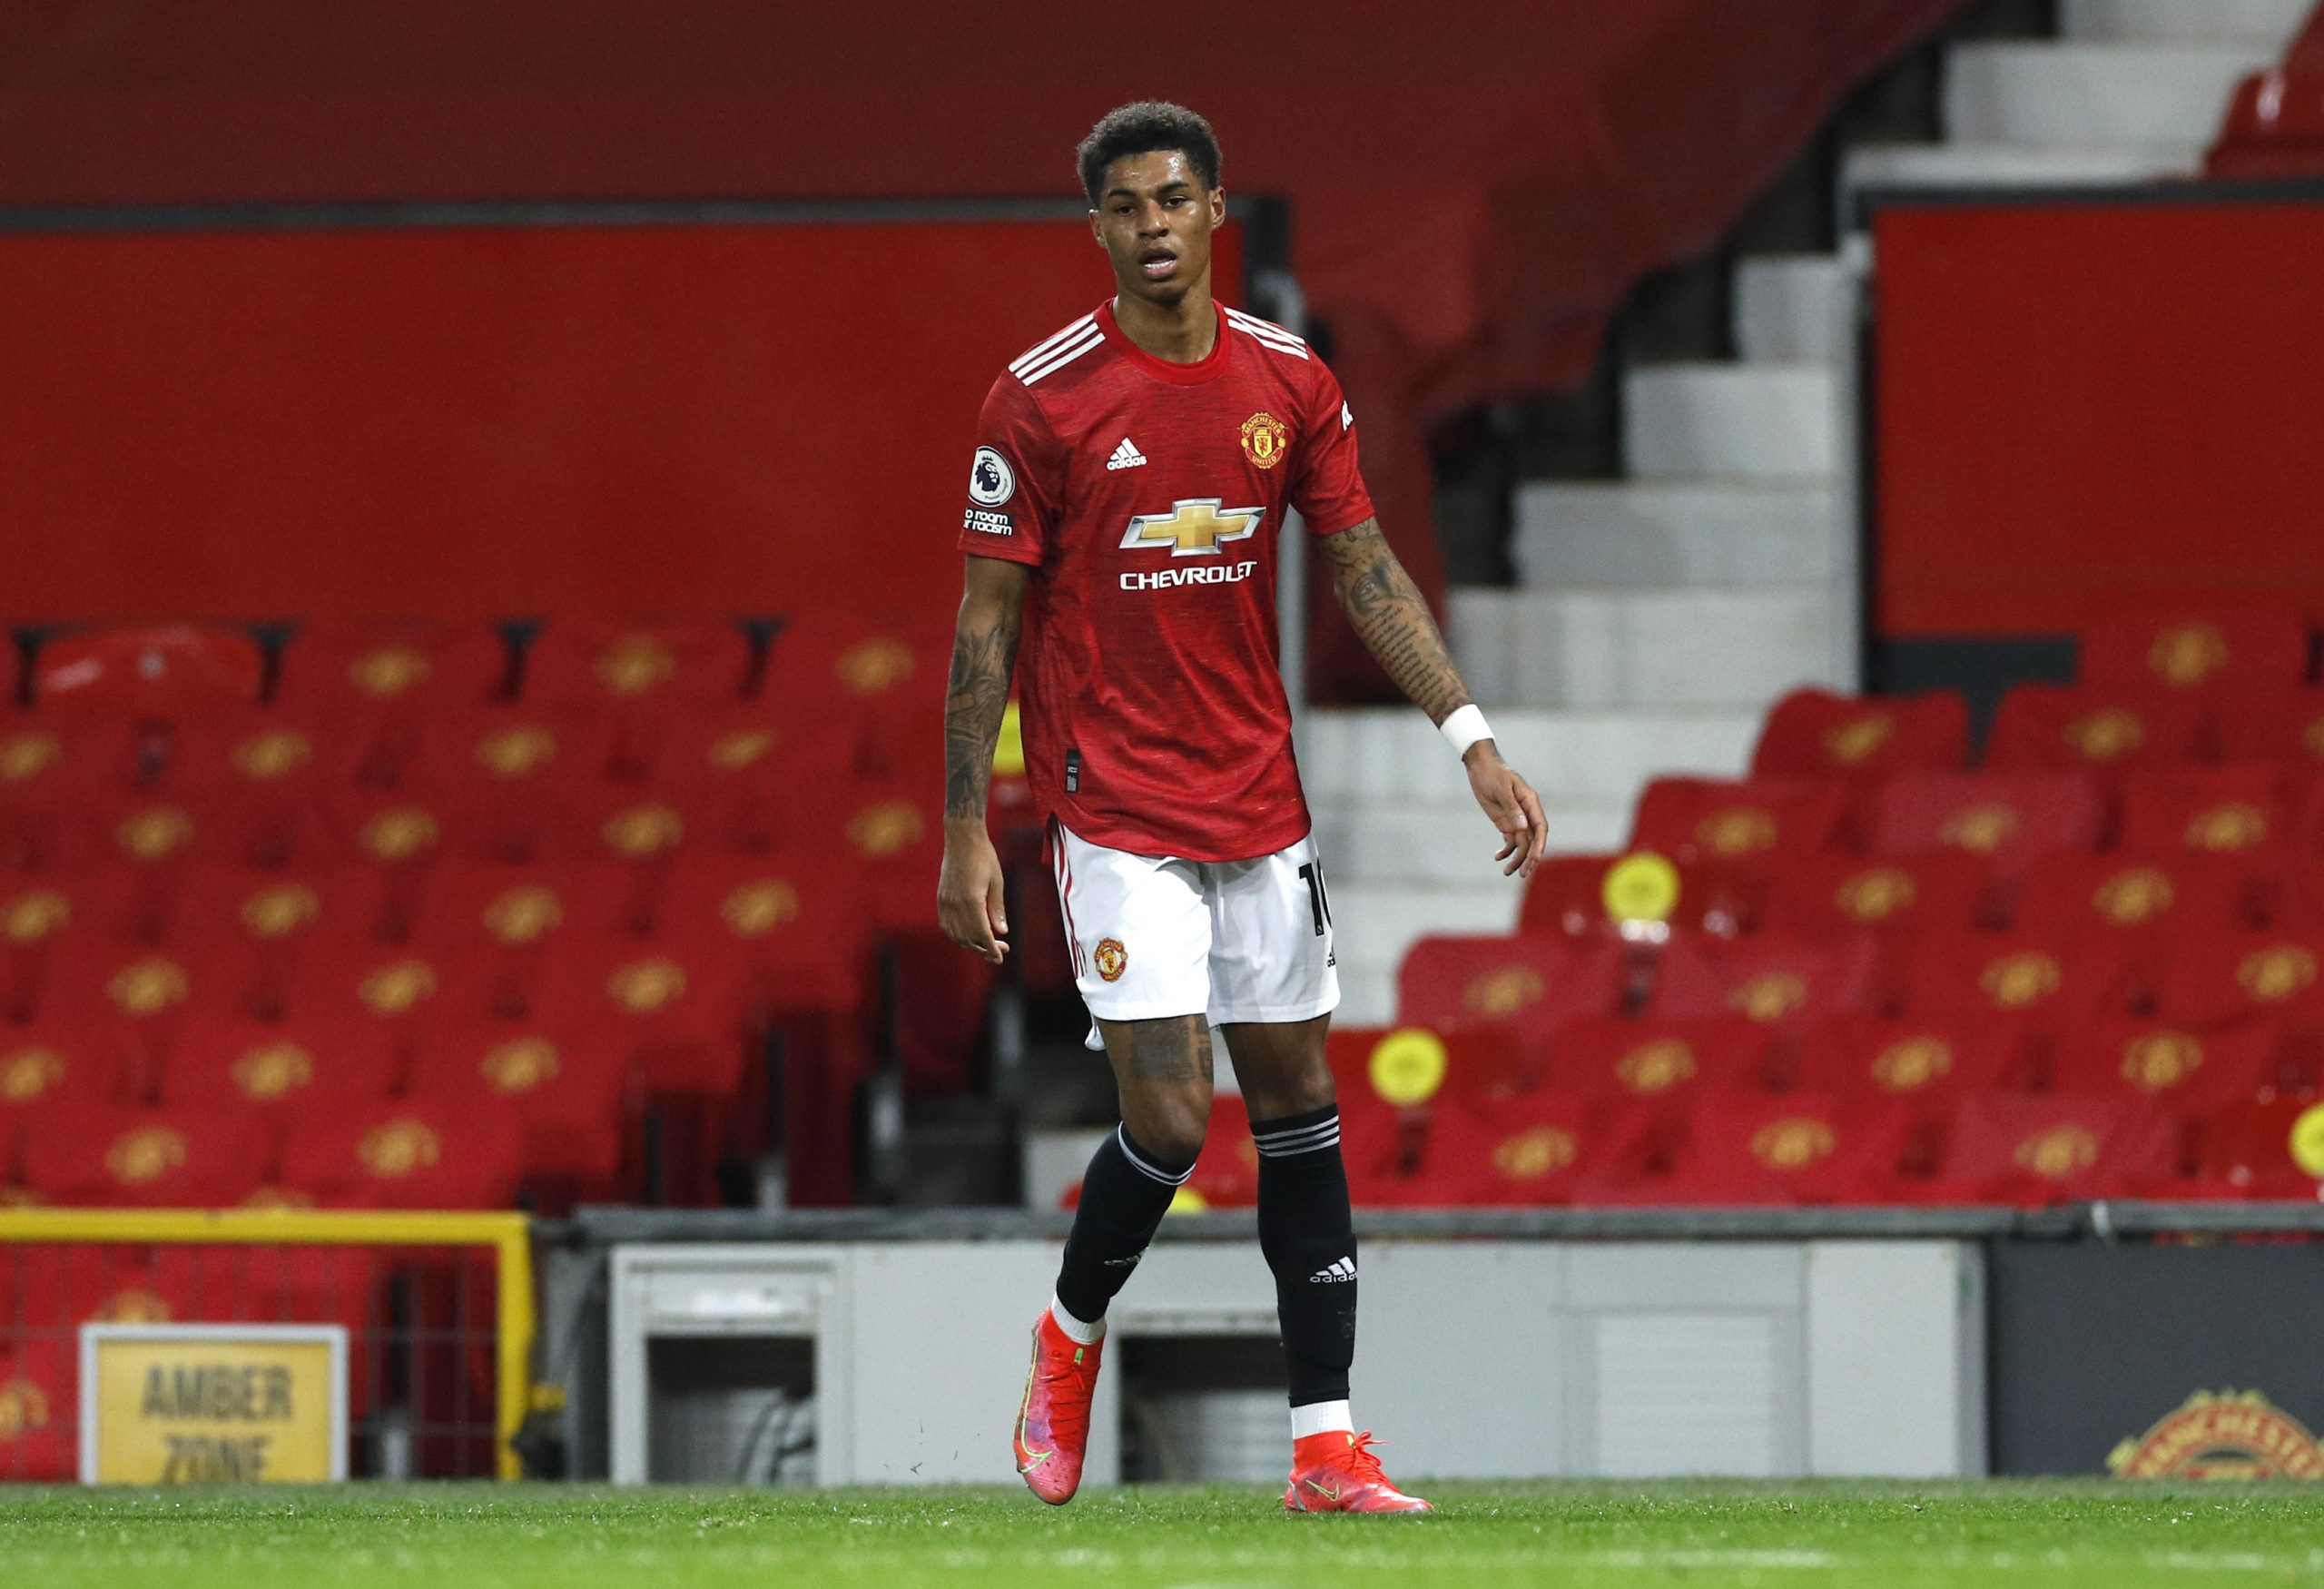 Marcus Rashford in action for Manchester United.